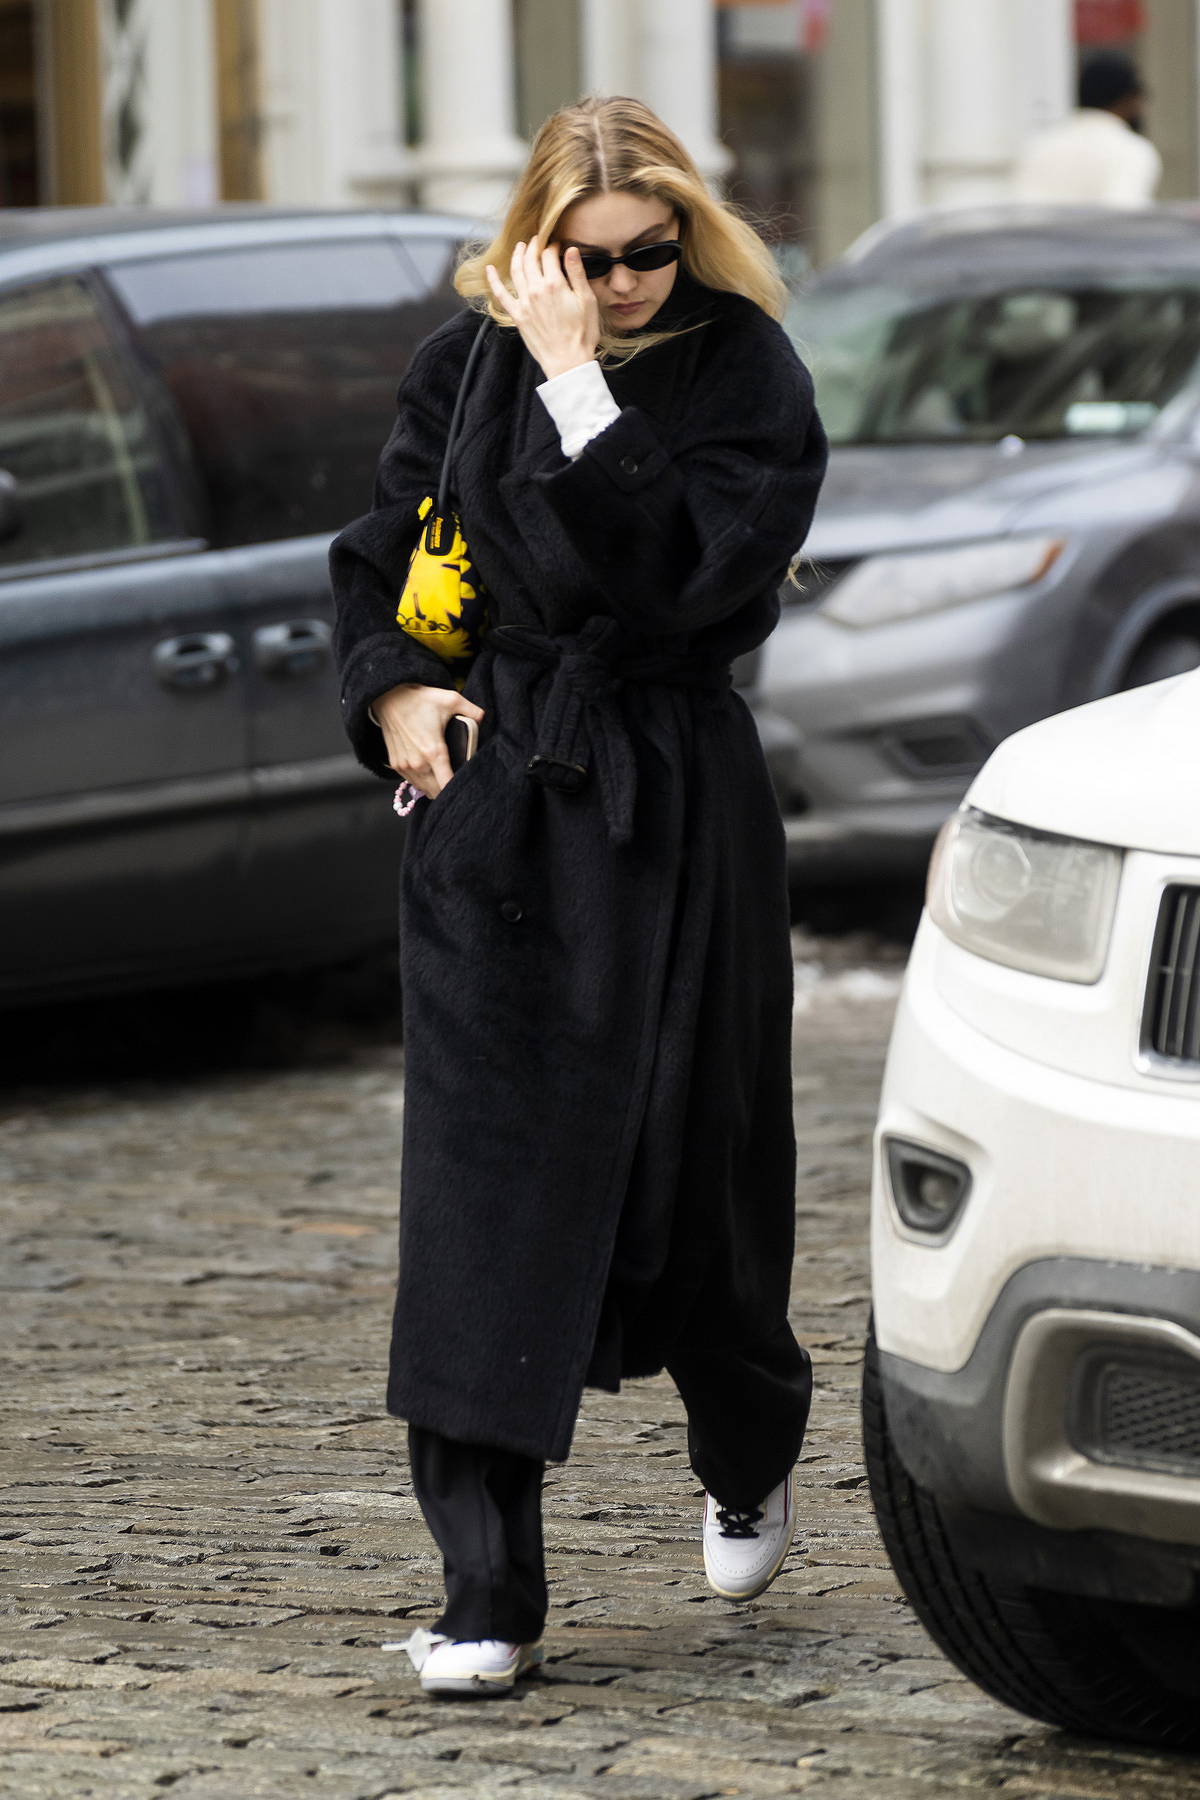 Gigi Hadid bundles up in a black winter coat as she steps out in